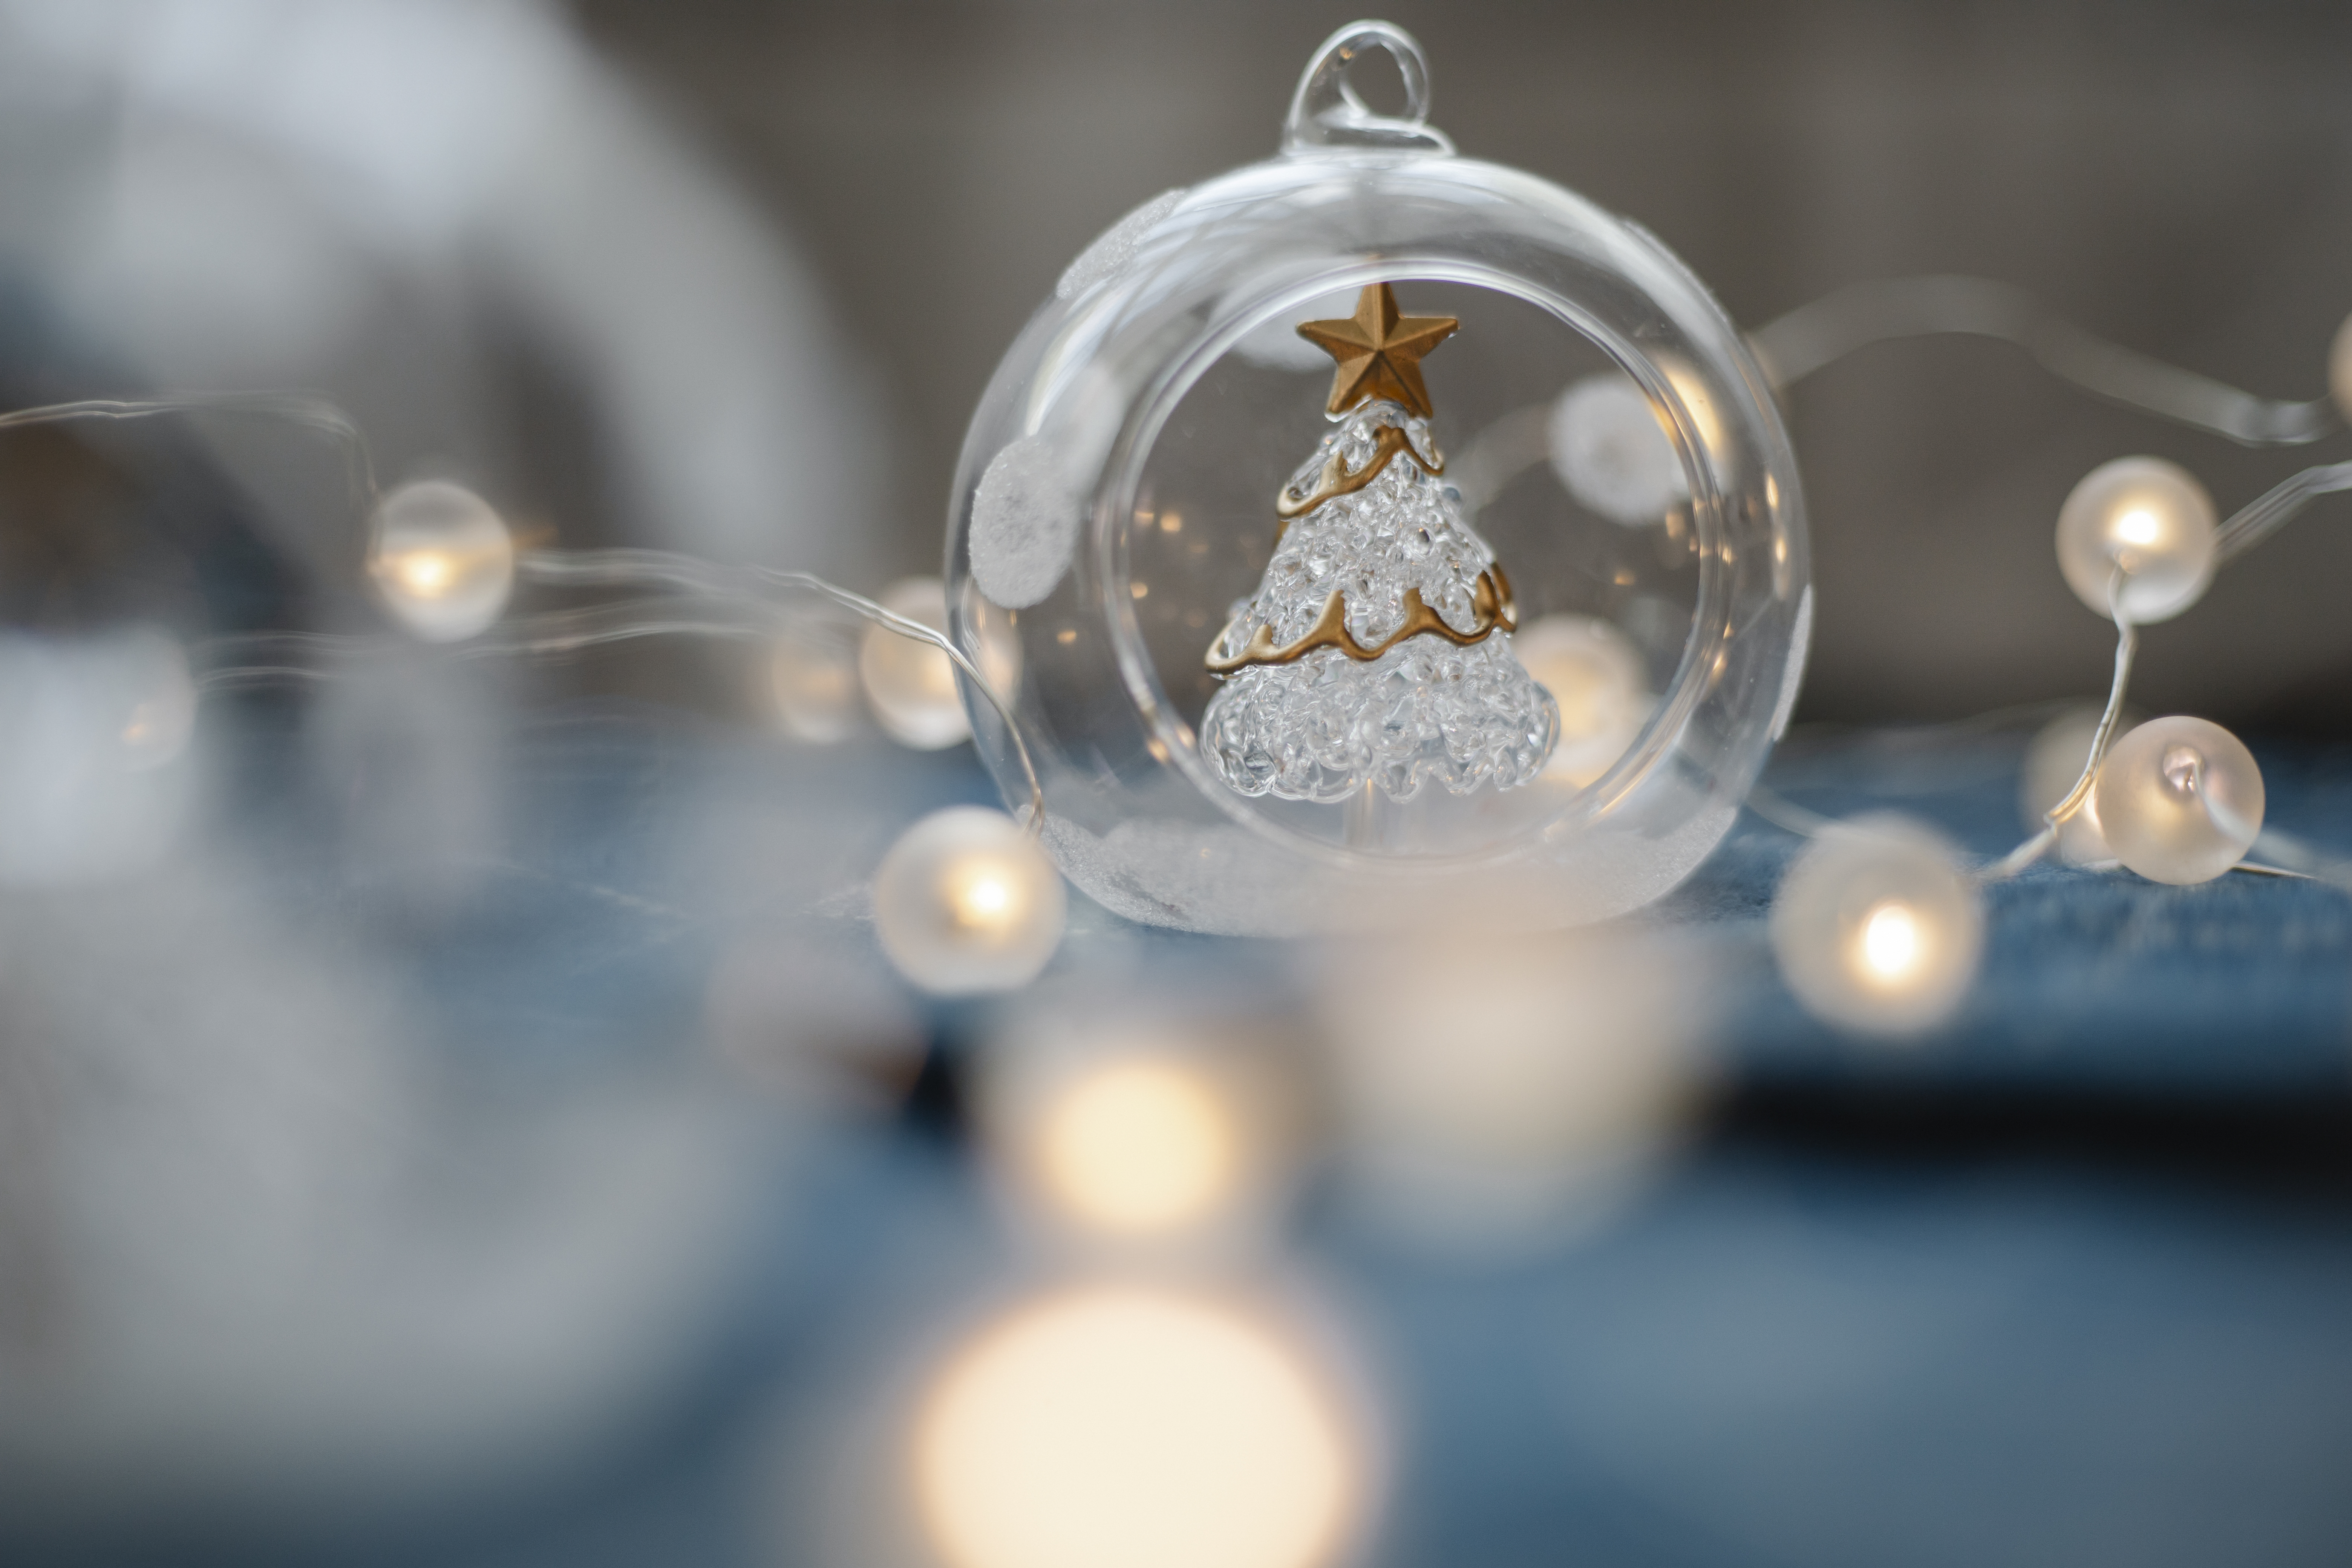 Free Glass Christmas tree inside transparent ball surrounded by burning garland for festive decorations Stock Photo